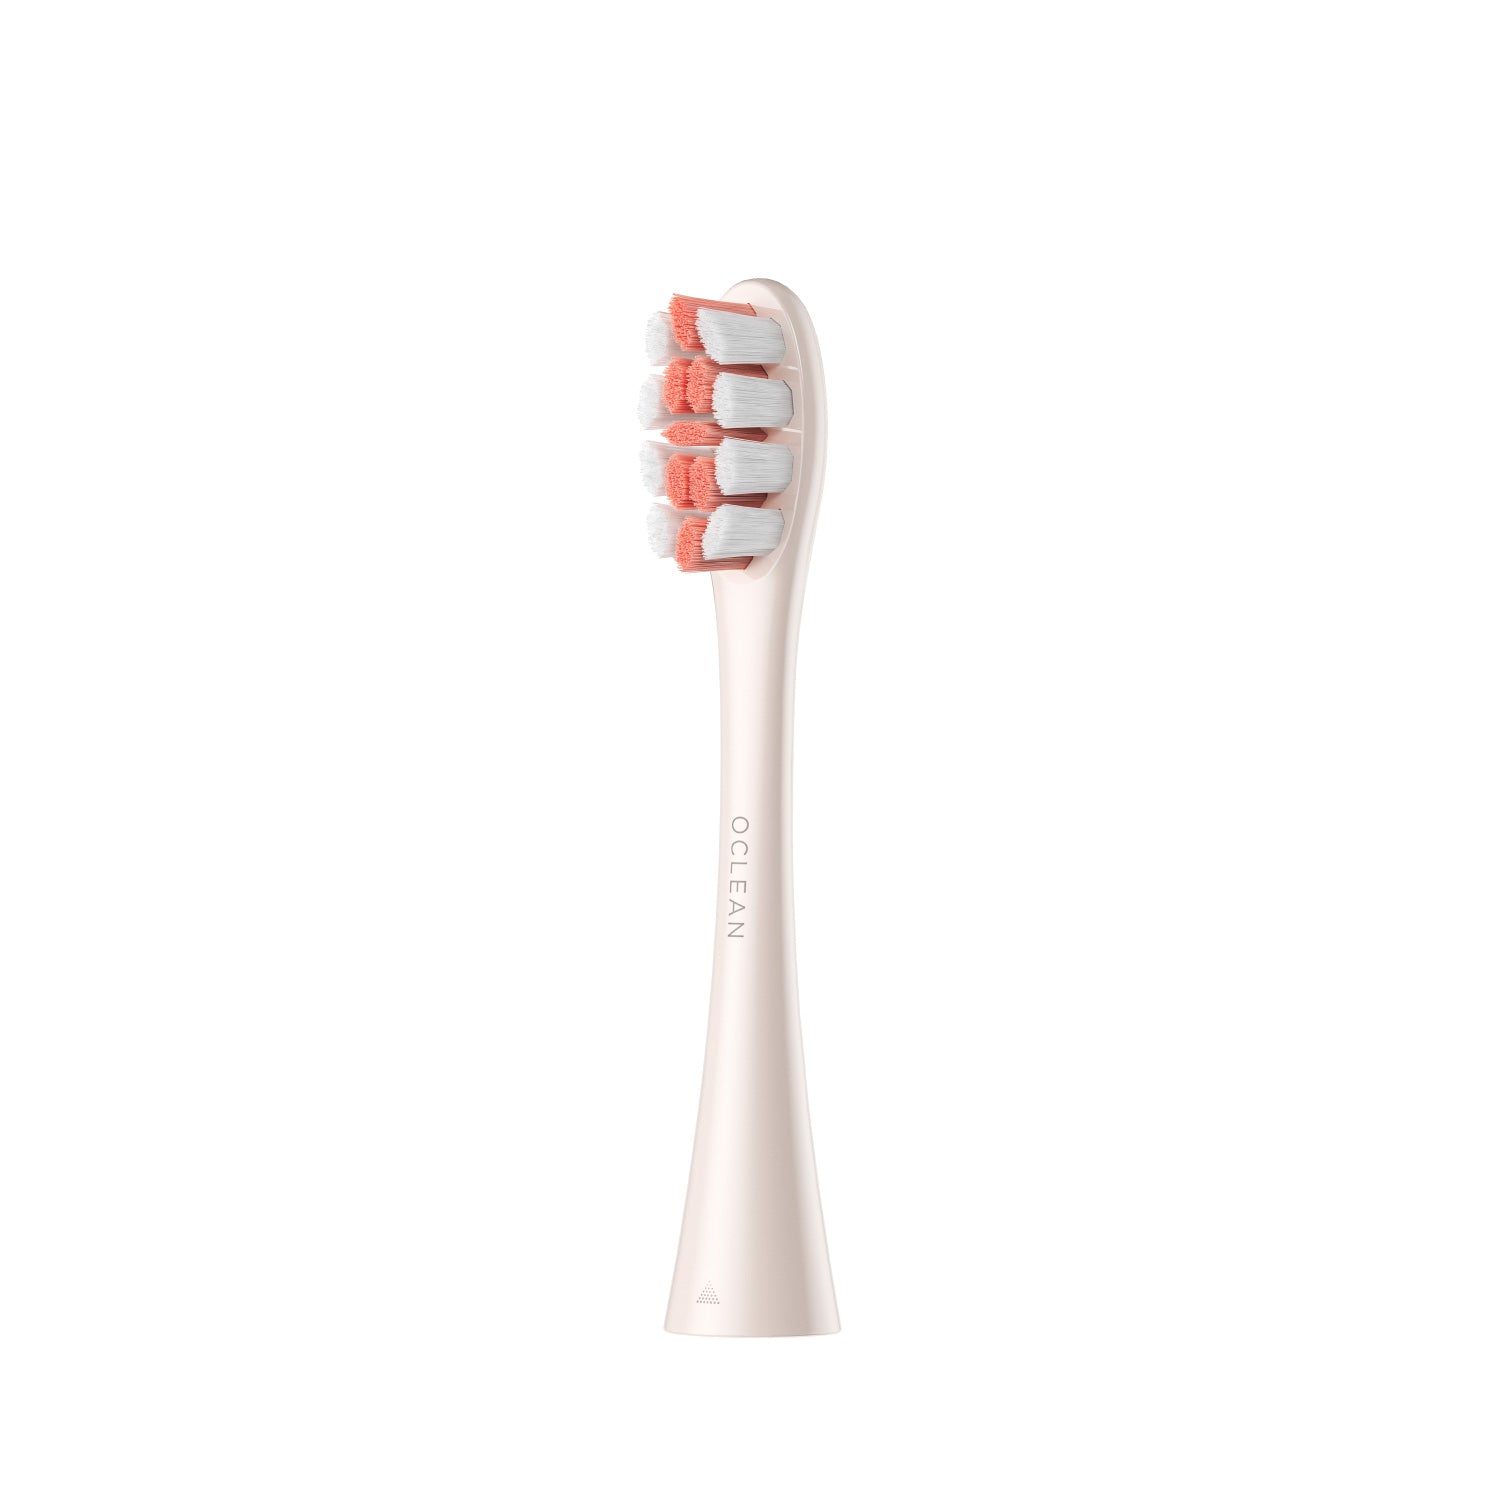 Oclean Replacement Brush for Electric Toothbrush